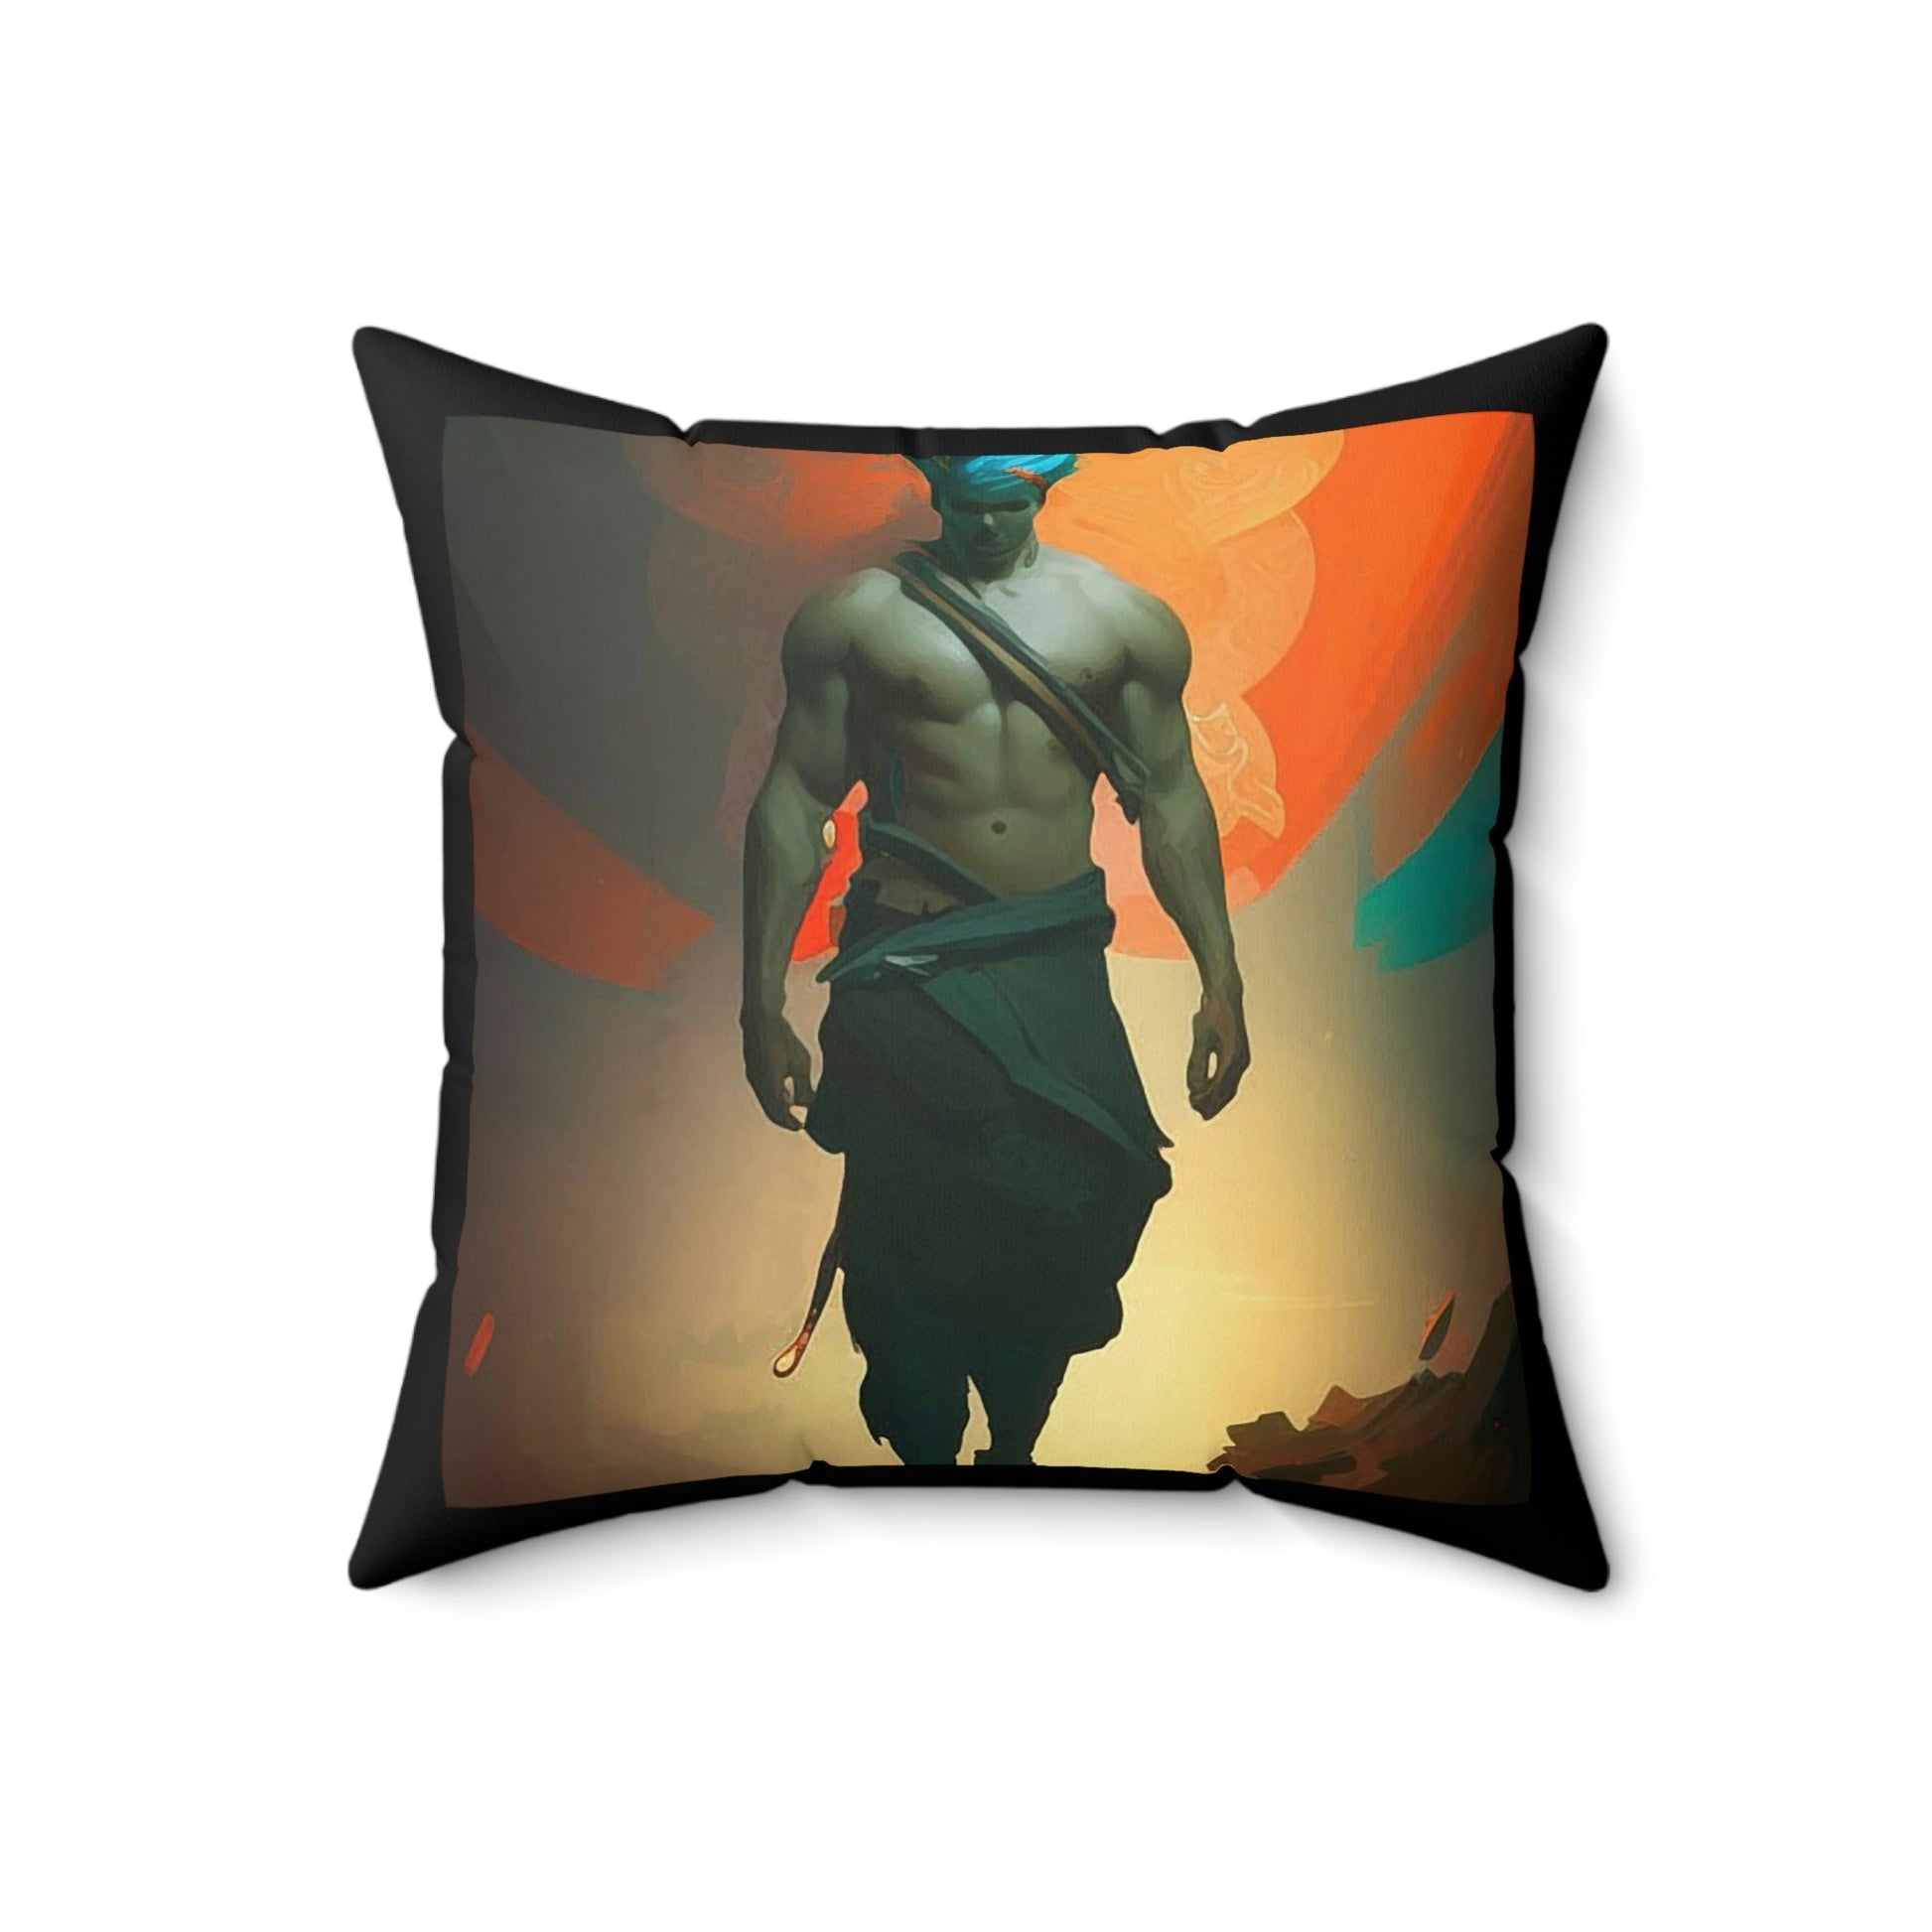 Stay Weird VIII Square Pillow